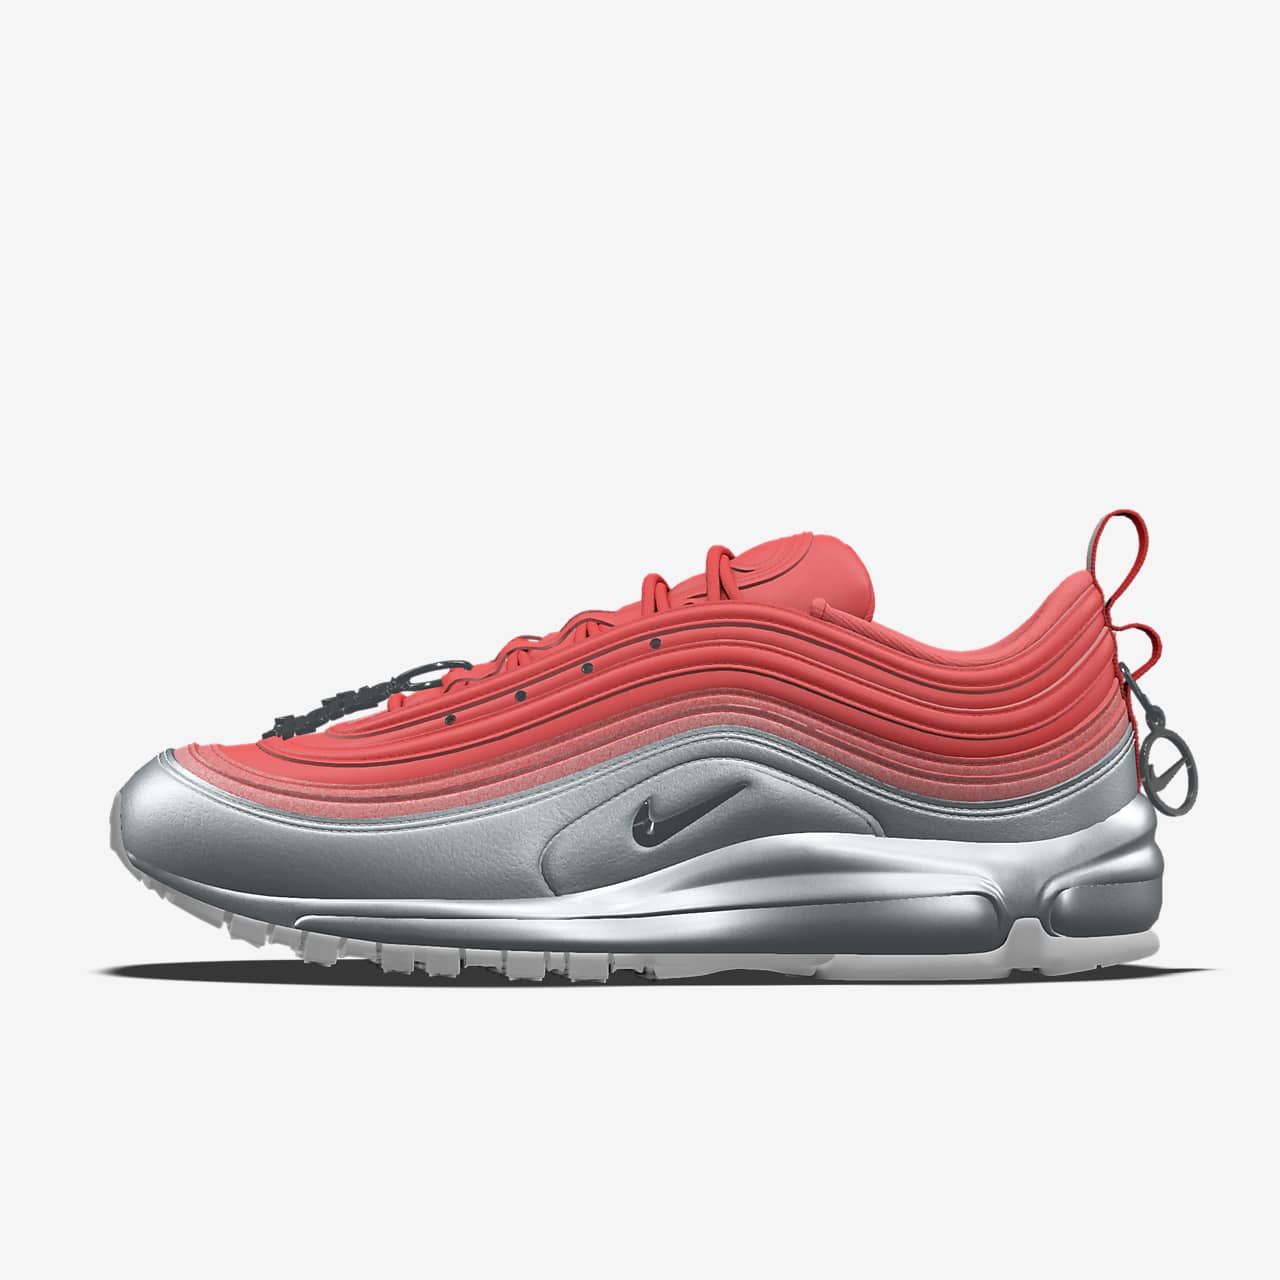 Nike Air Max 97 "Hot Girl" By You 专属定制运动鞋